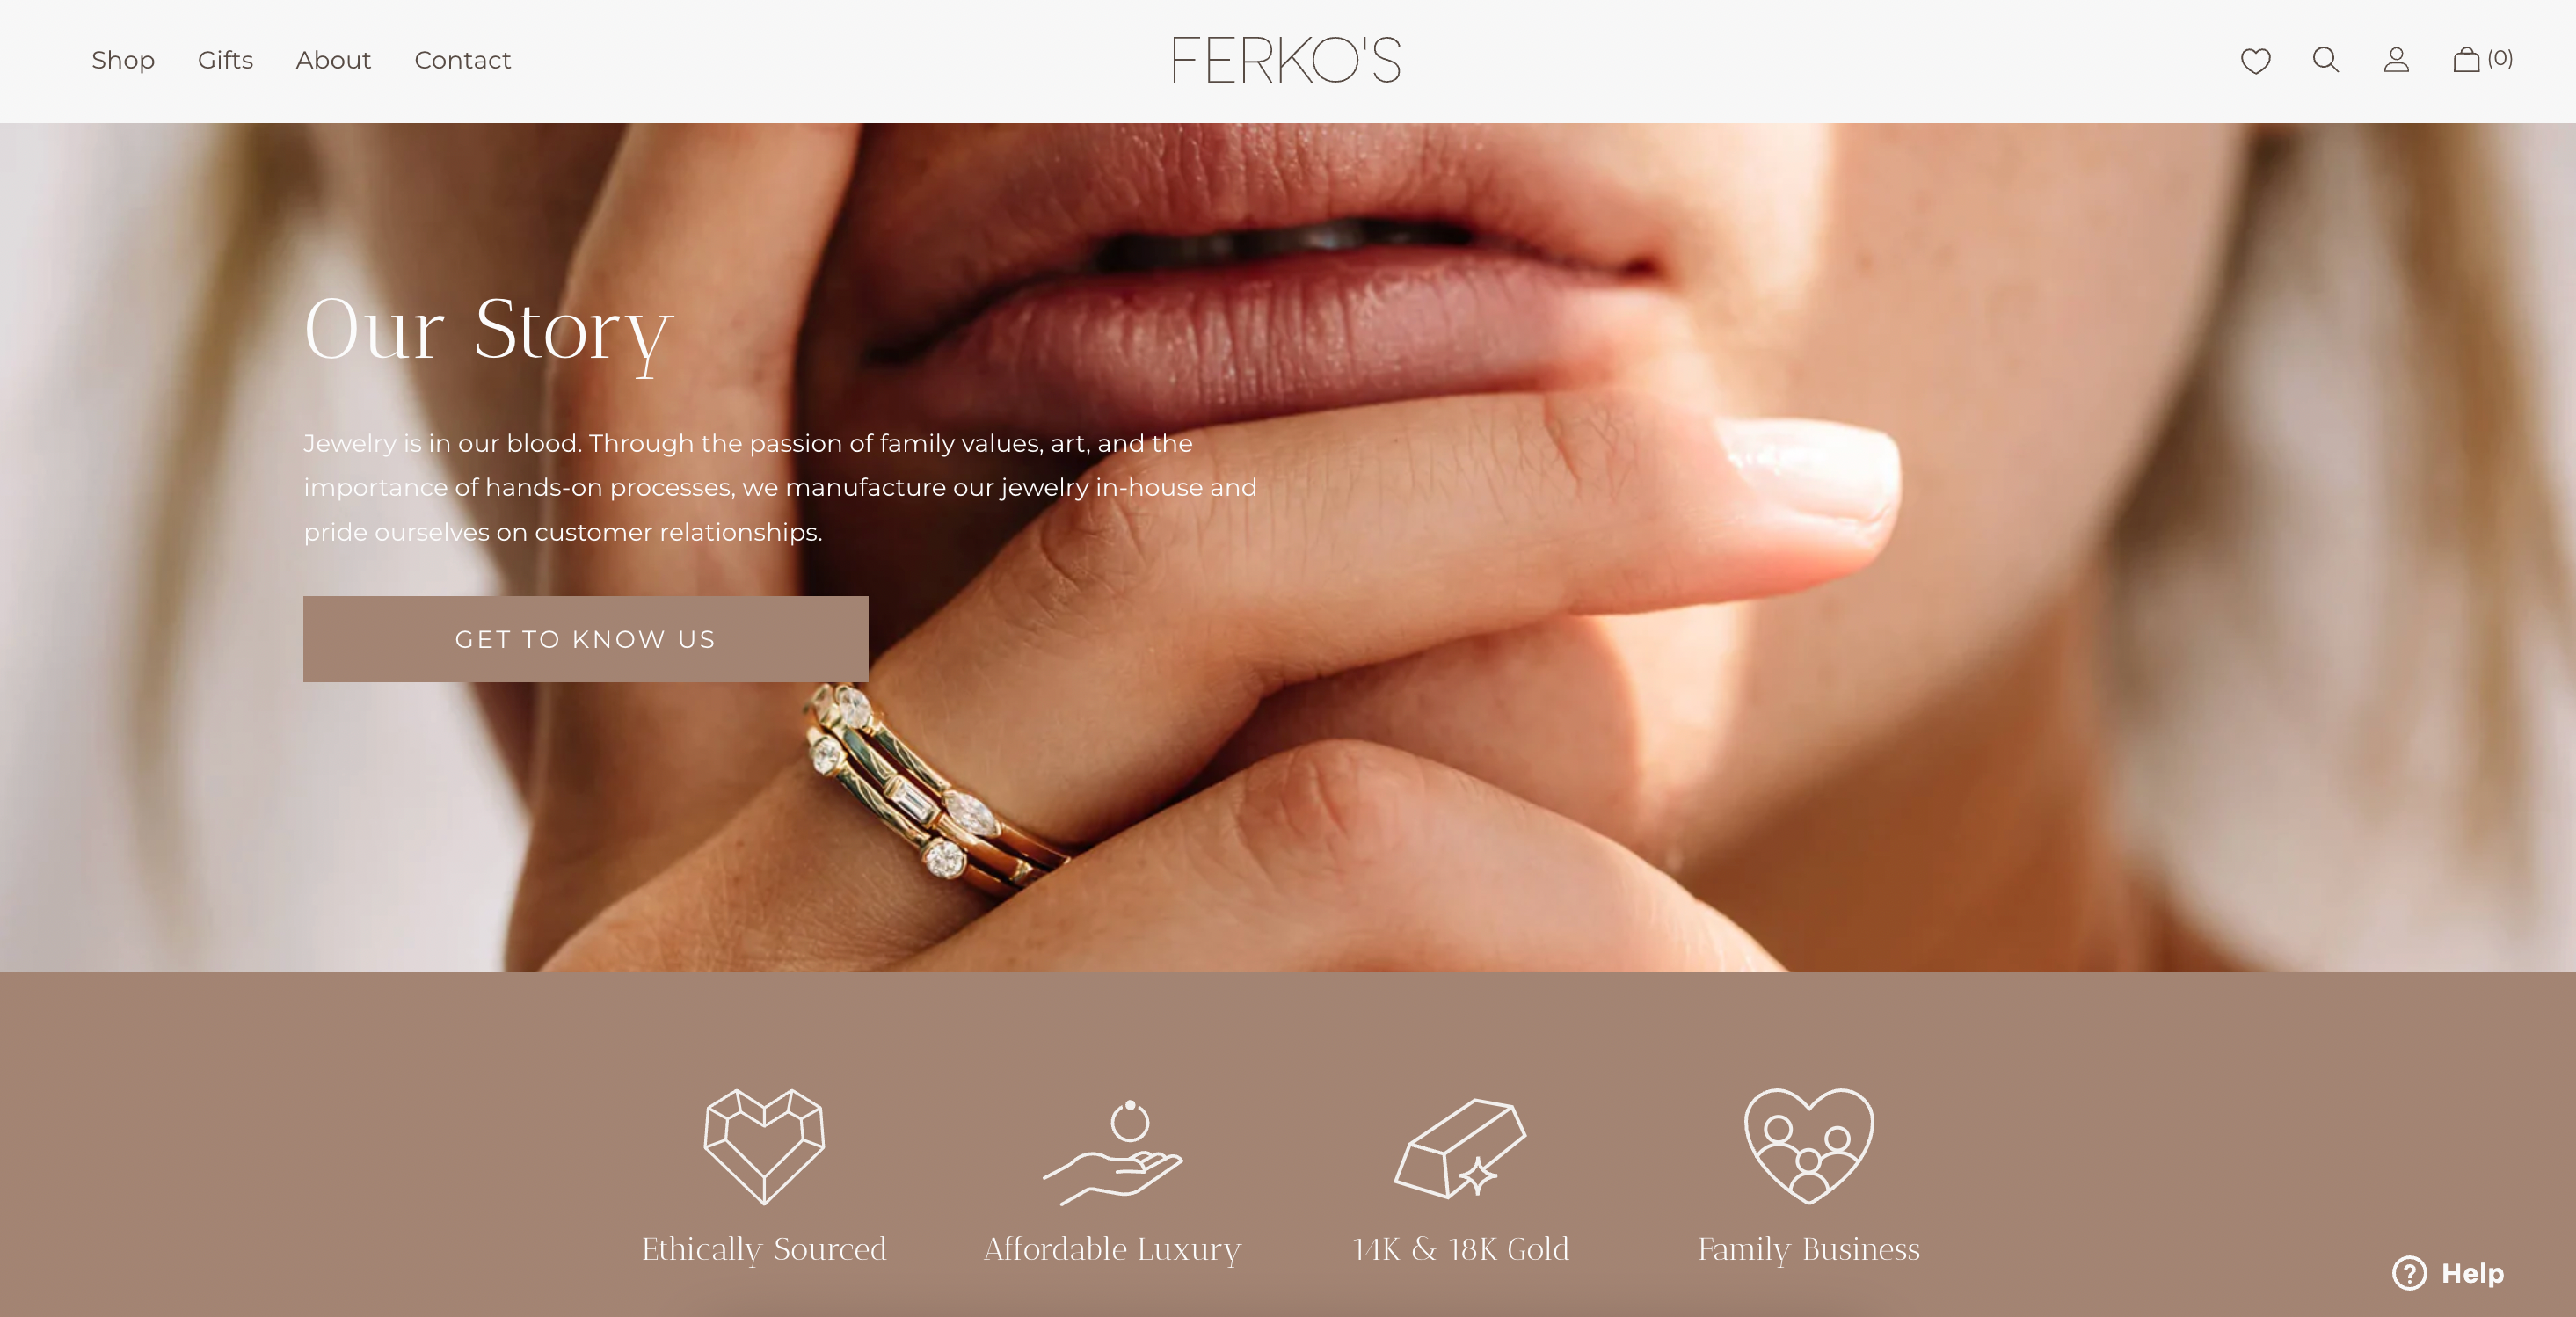 On the Ferko's home page, a person wearing rings holds fingers up to their mouth 